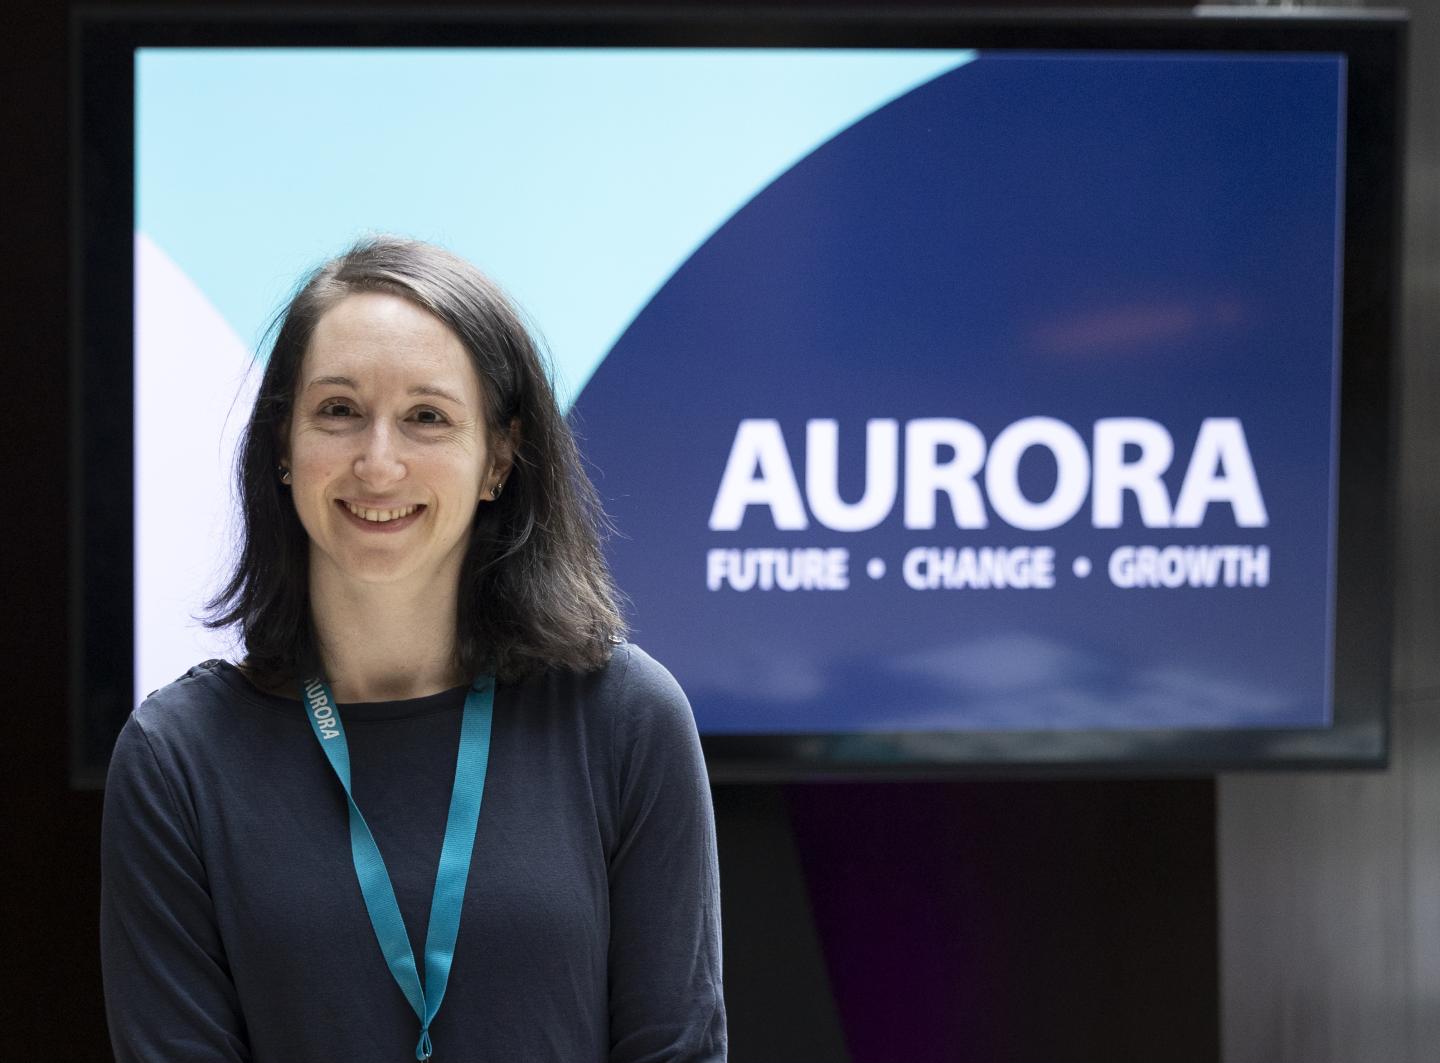 Woman smiling with Aurora programme signage in the background